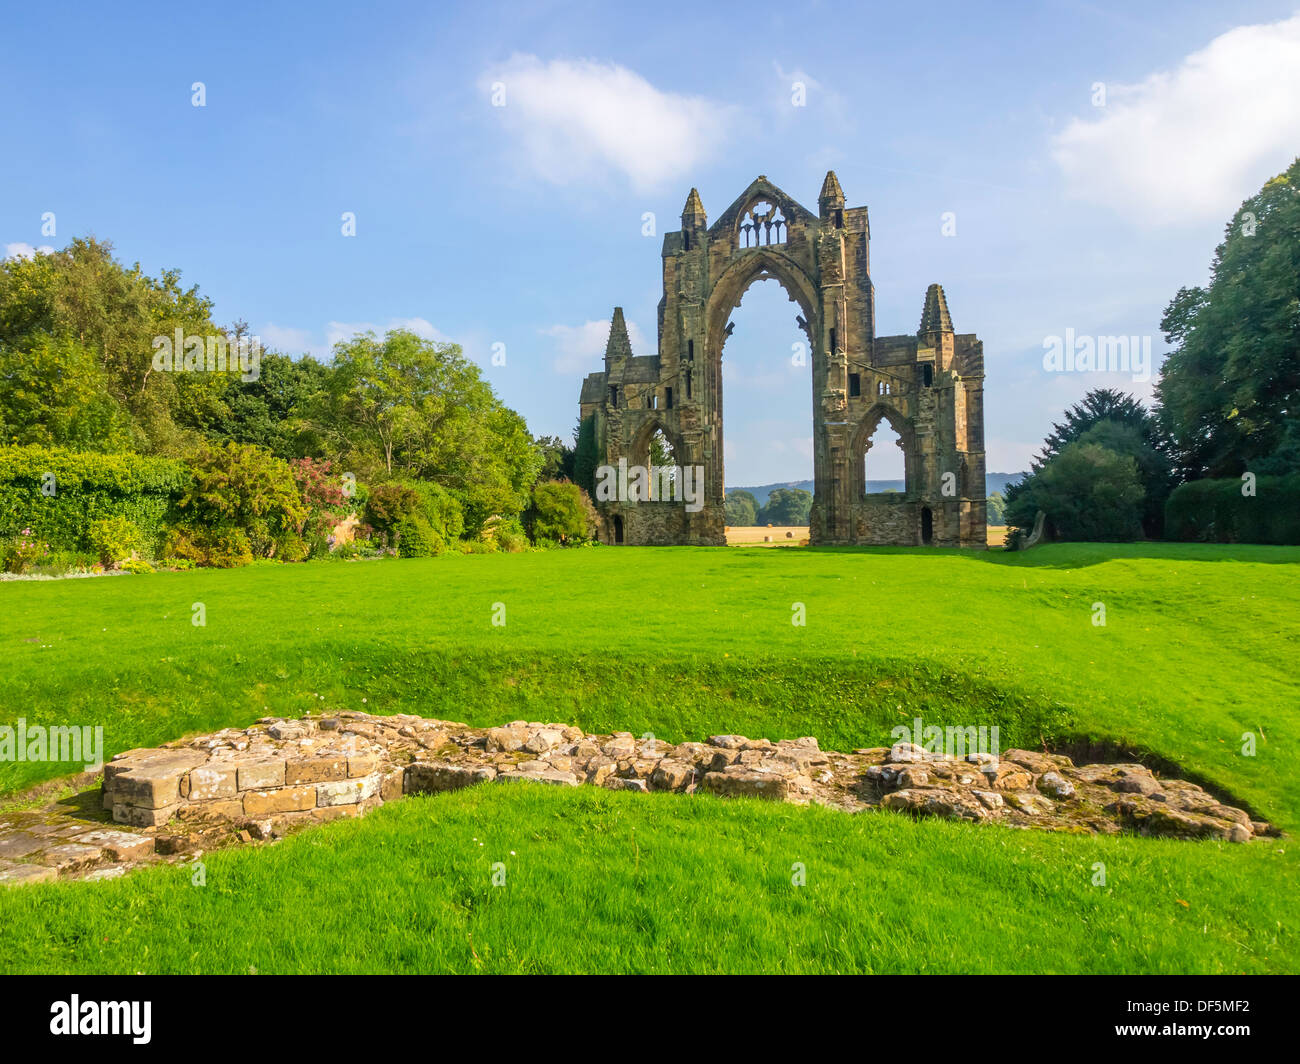 The ruins of the east end of a 14th century Augustinian priory founded by the Bruce family, afterwards Kings of Scotland. Stock Photo